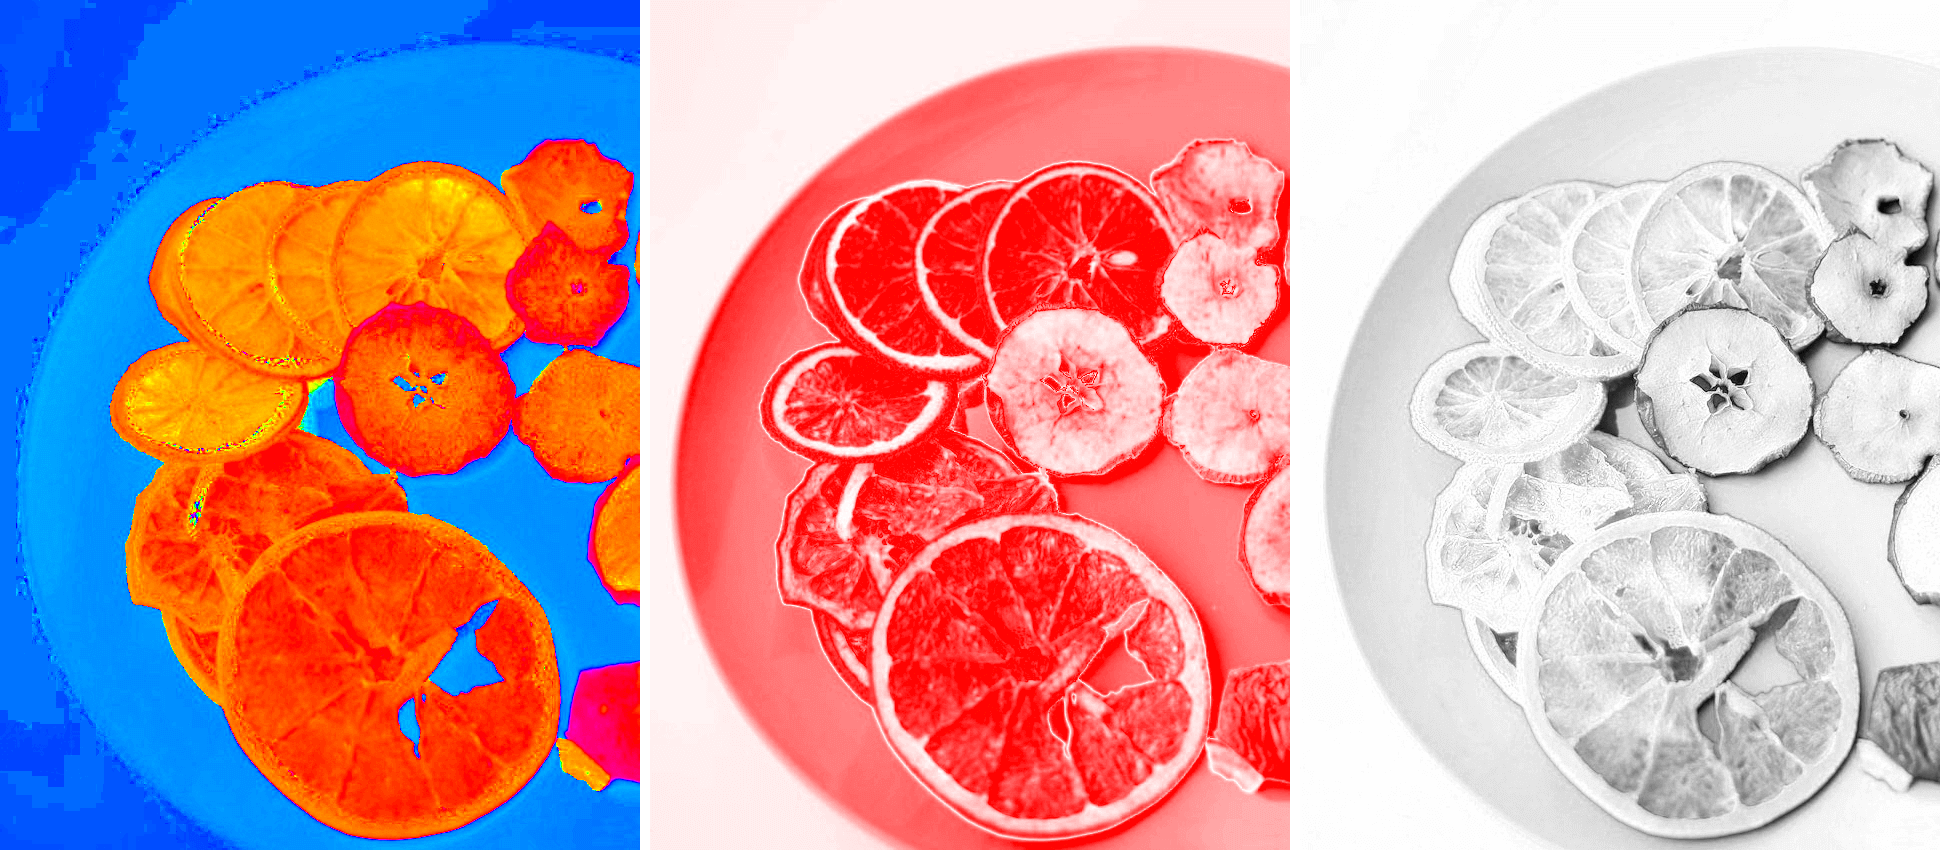 In this example, we separate all three color channels of the HSV color space into separate images. The hue channel visually illustrates the specific hues used to represent the plate and citrus. The saturation channel gives an idea of the intensity or purity of these colors. Finally, the value channel shows the luminance levels associated with each element. (Source: Pexels.)